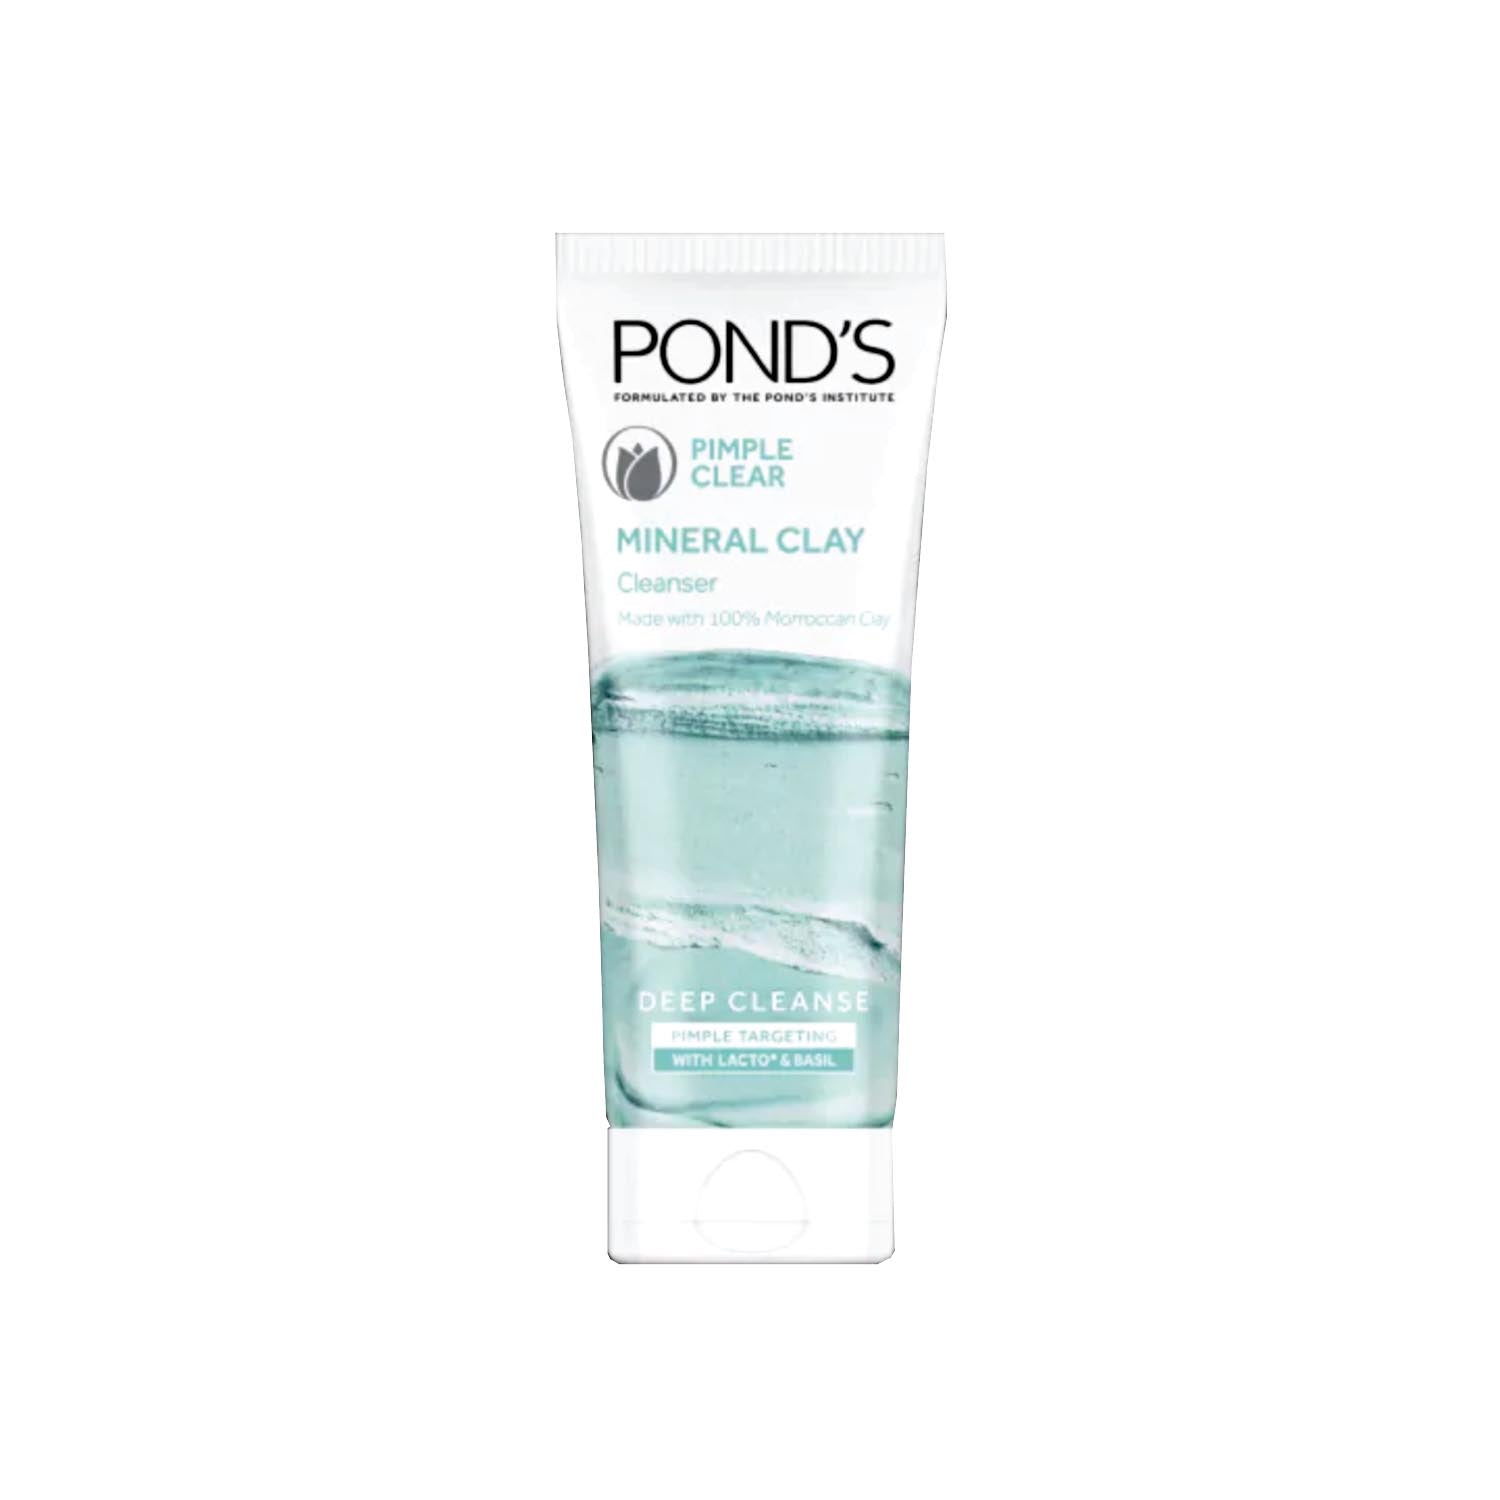 Pond's Pimple Clear Mineral Clay Cleanser, 81ml